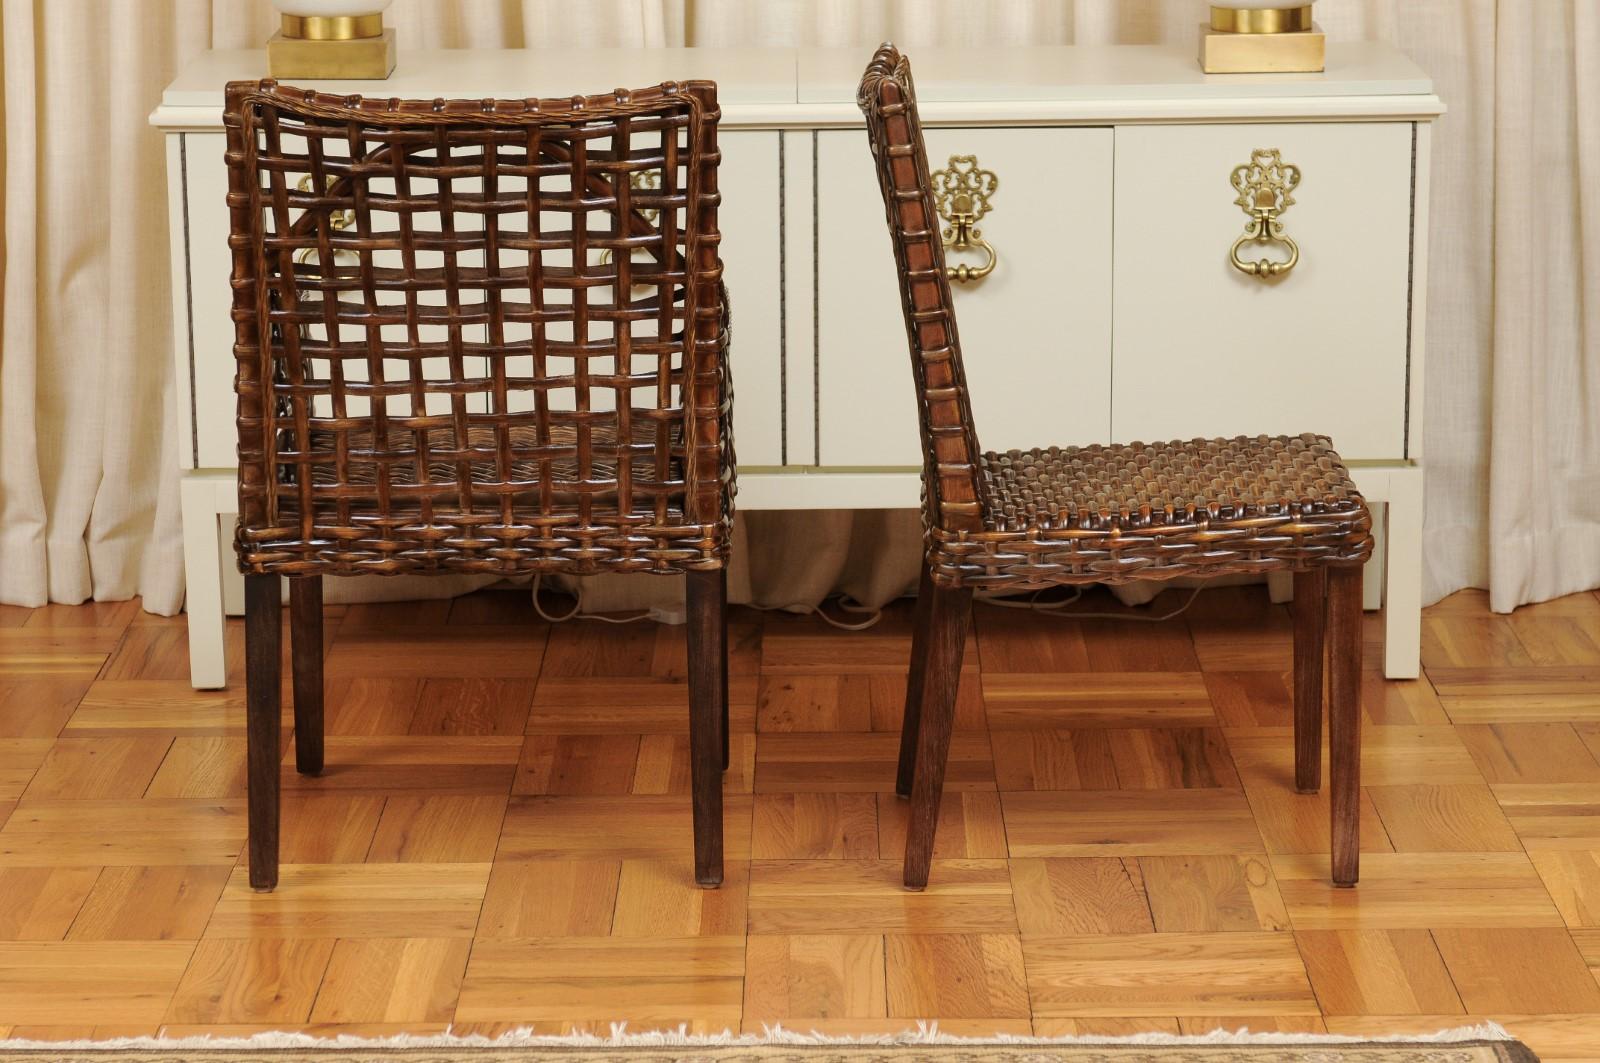 Superb Set of 12 Cerused Mahogany and Cane Dining Chairs in Aged Tobacco For Sale 3